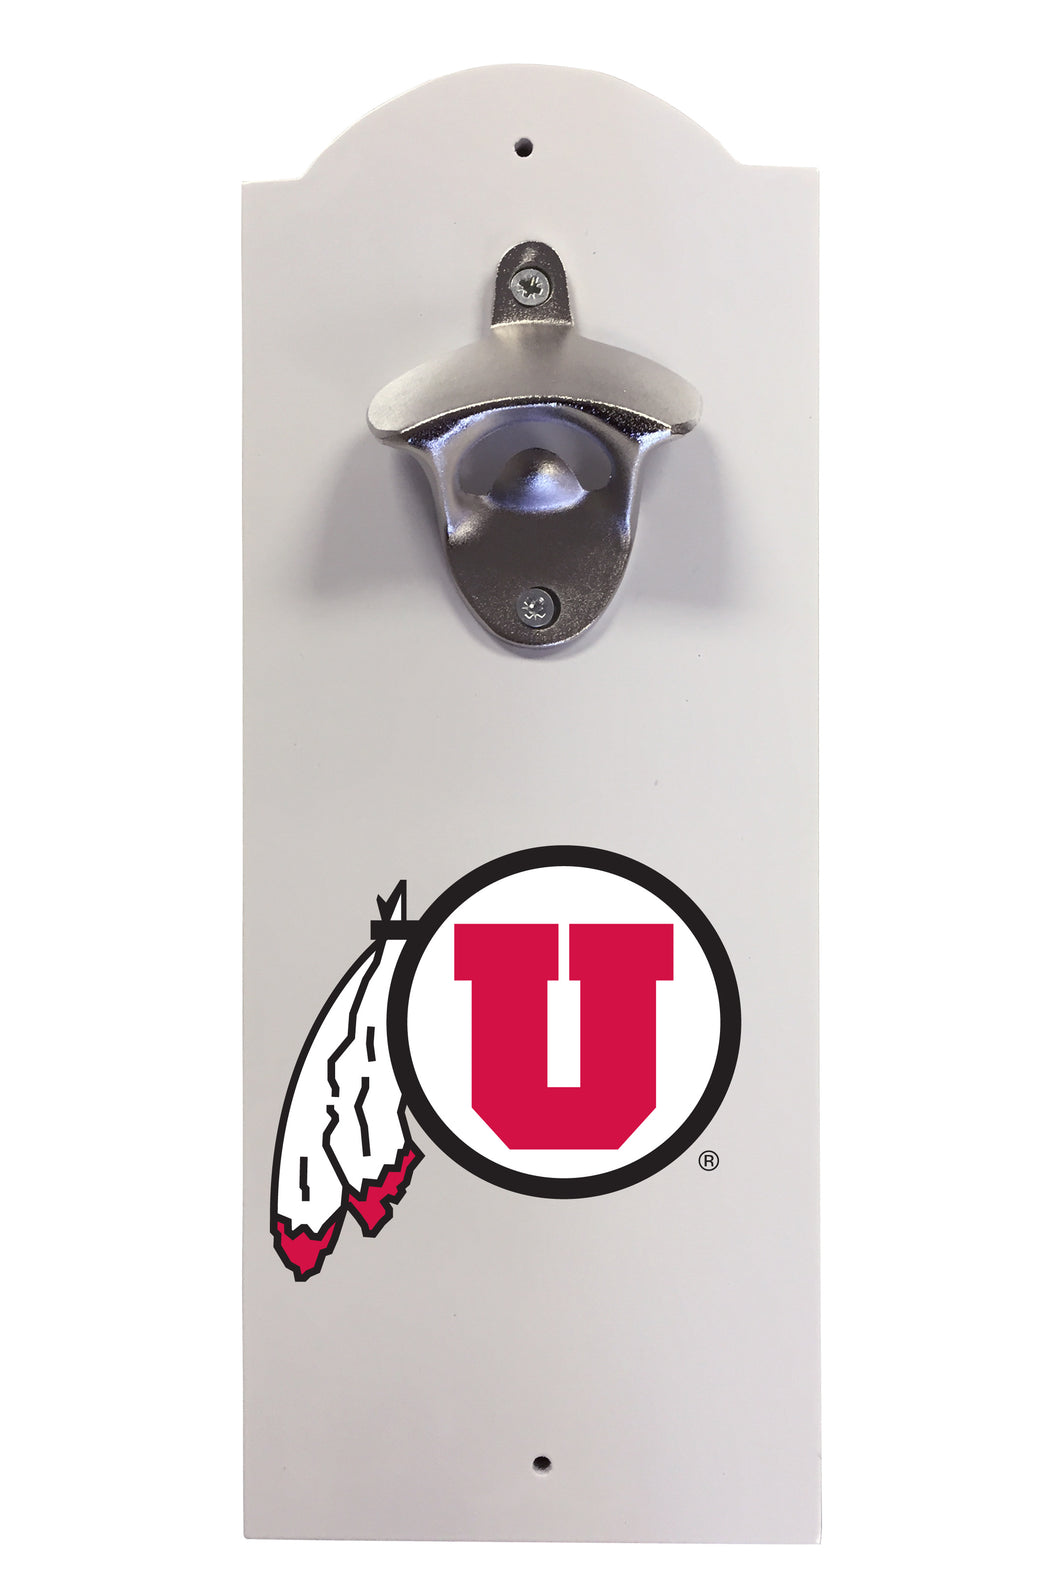 Utah Utes Wall-Mounted Bottle Opener – Sturdy Metal with Decorative Wood Base for Home Bars, Rec Rooms & Fan Caves